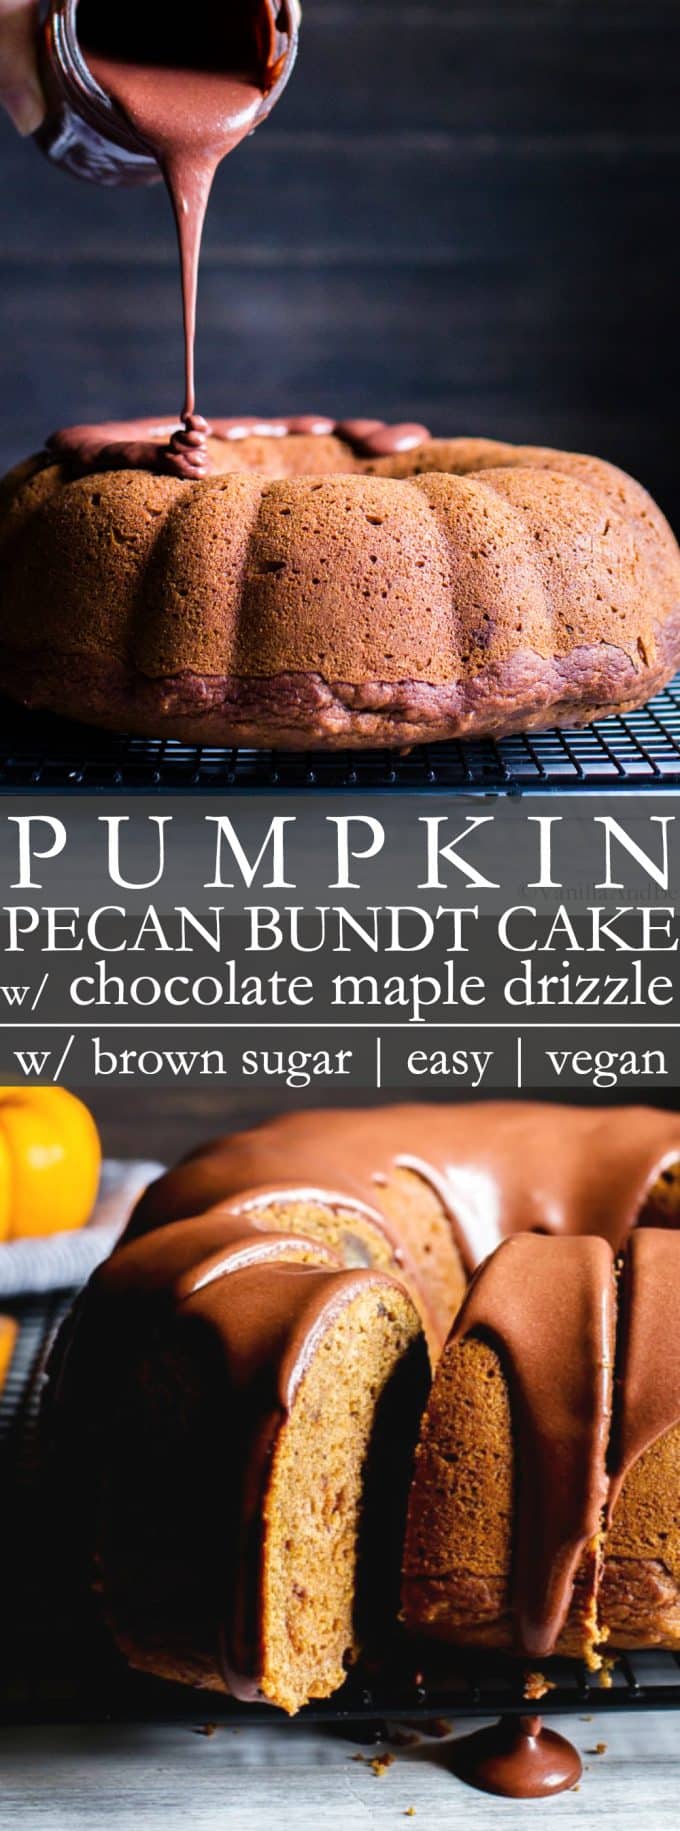 Pinterest pin for Pumpkin Bundt Cake with chocolate maple glaze on top. 